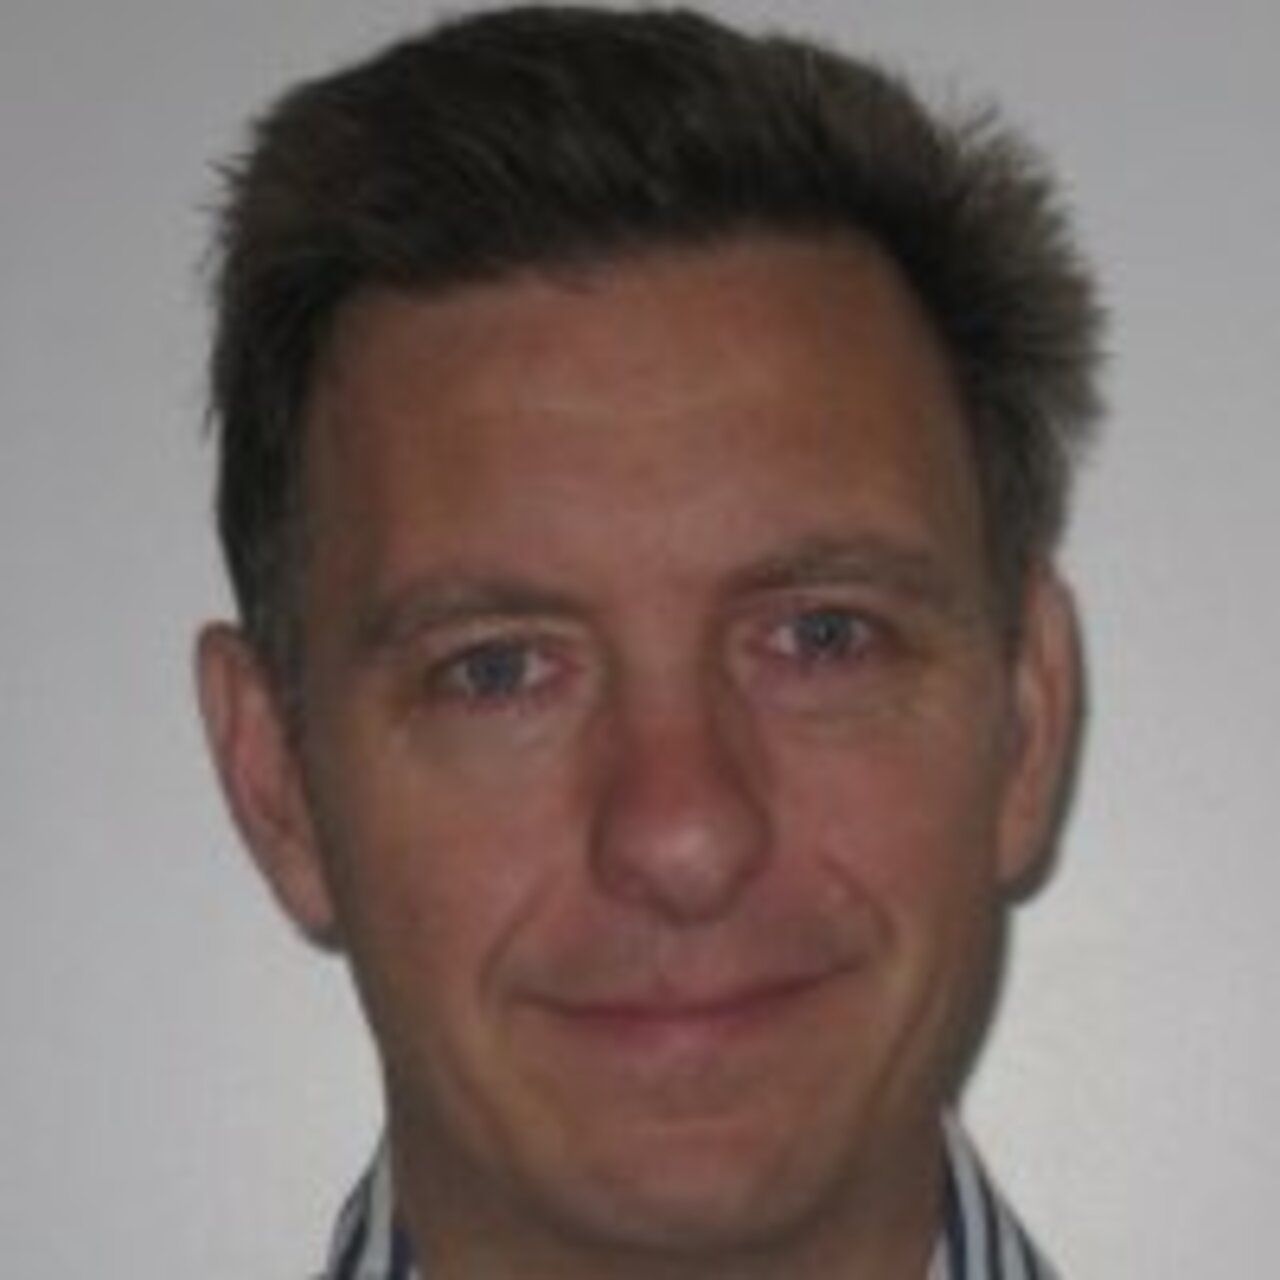 From THE SERVER LABS: Paul Parson 2 talk about #european #cloud #market http://ow.ly/YJArh #dsm #iot #brussels https://t.co/gMHrgbTvyX